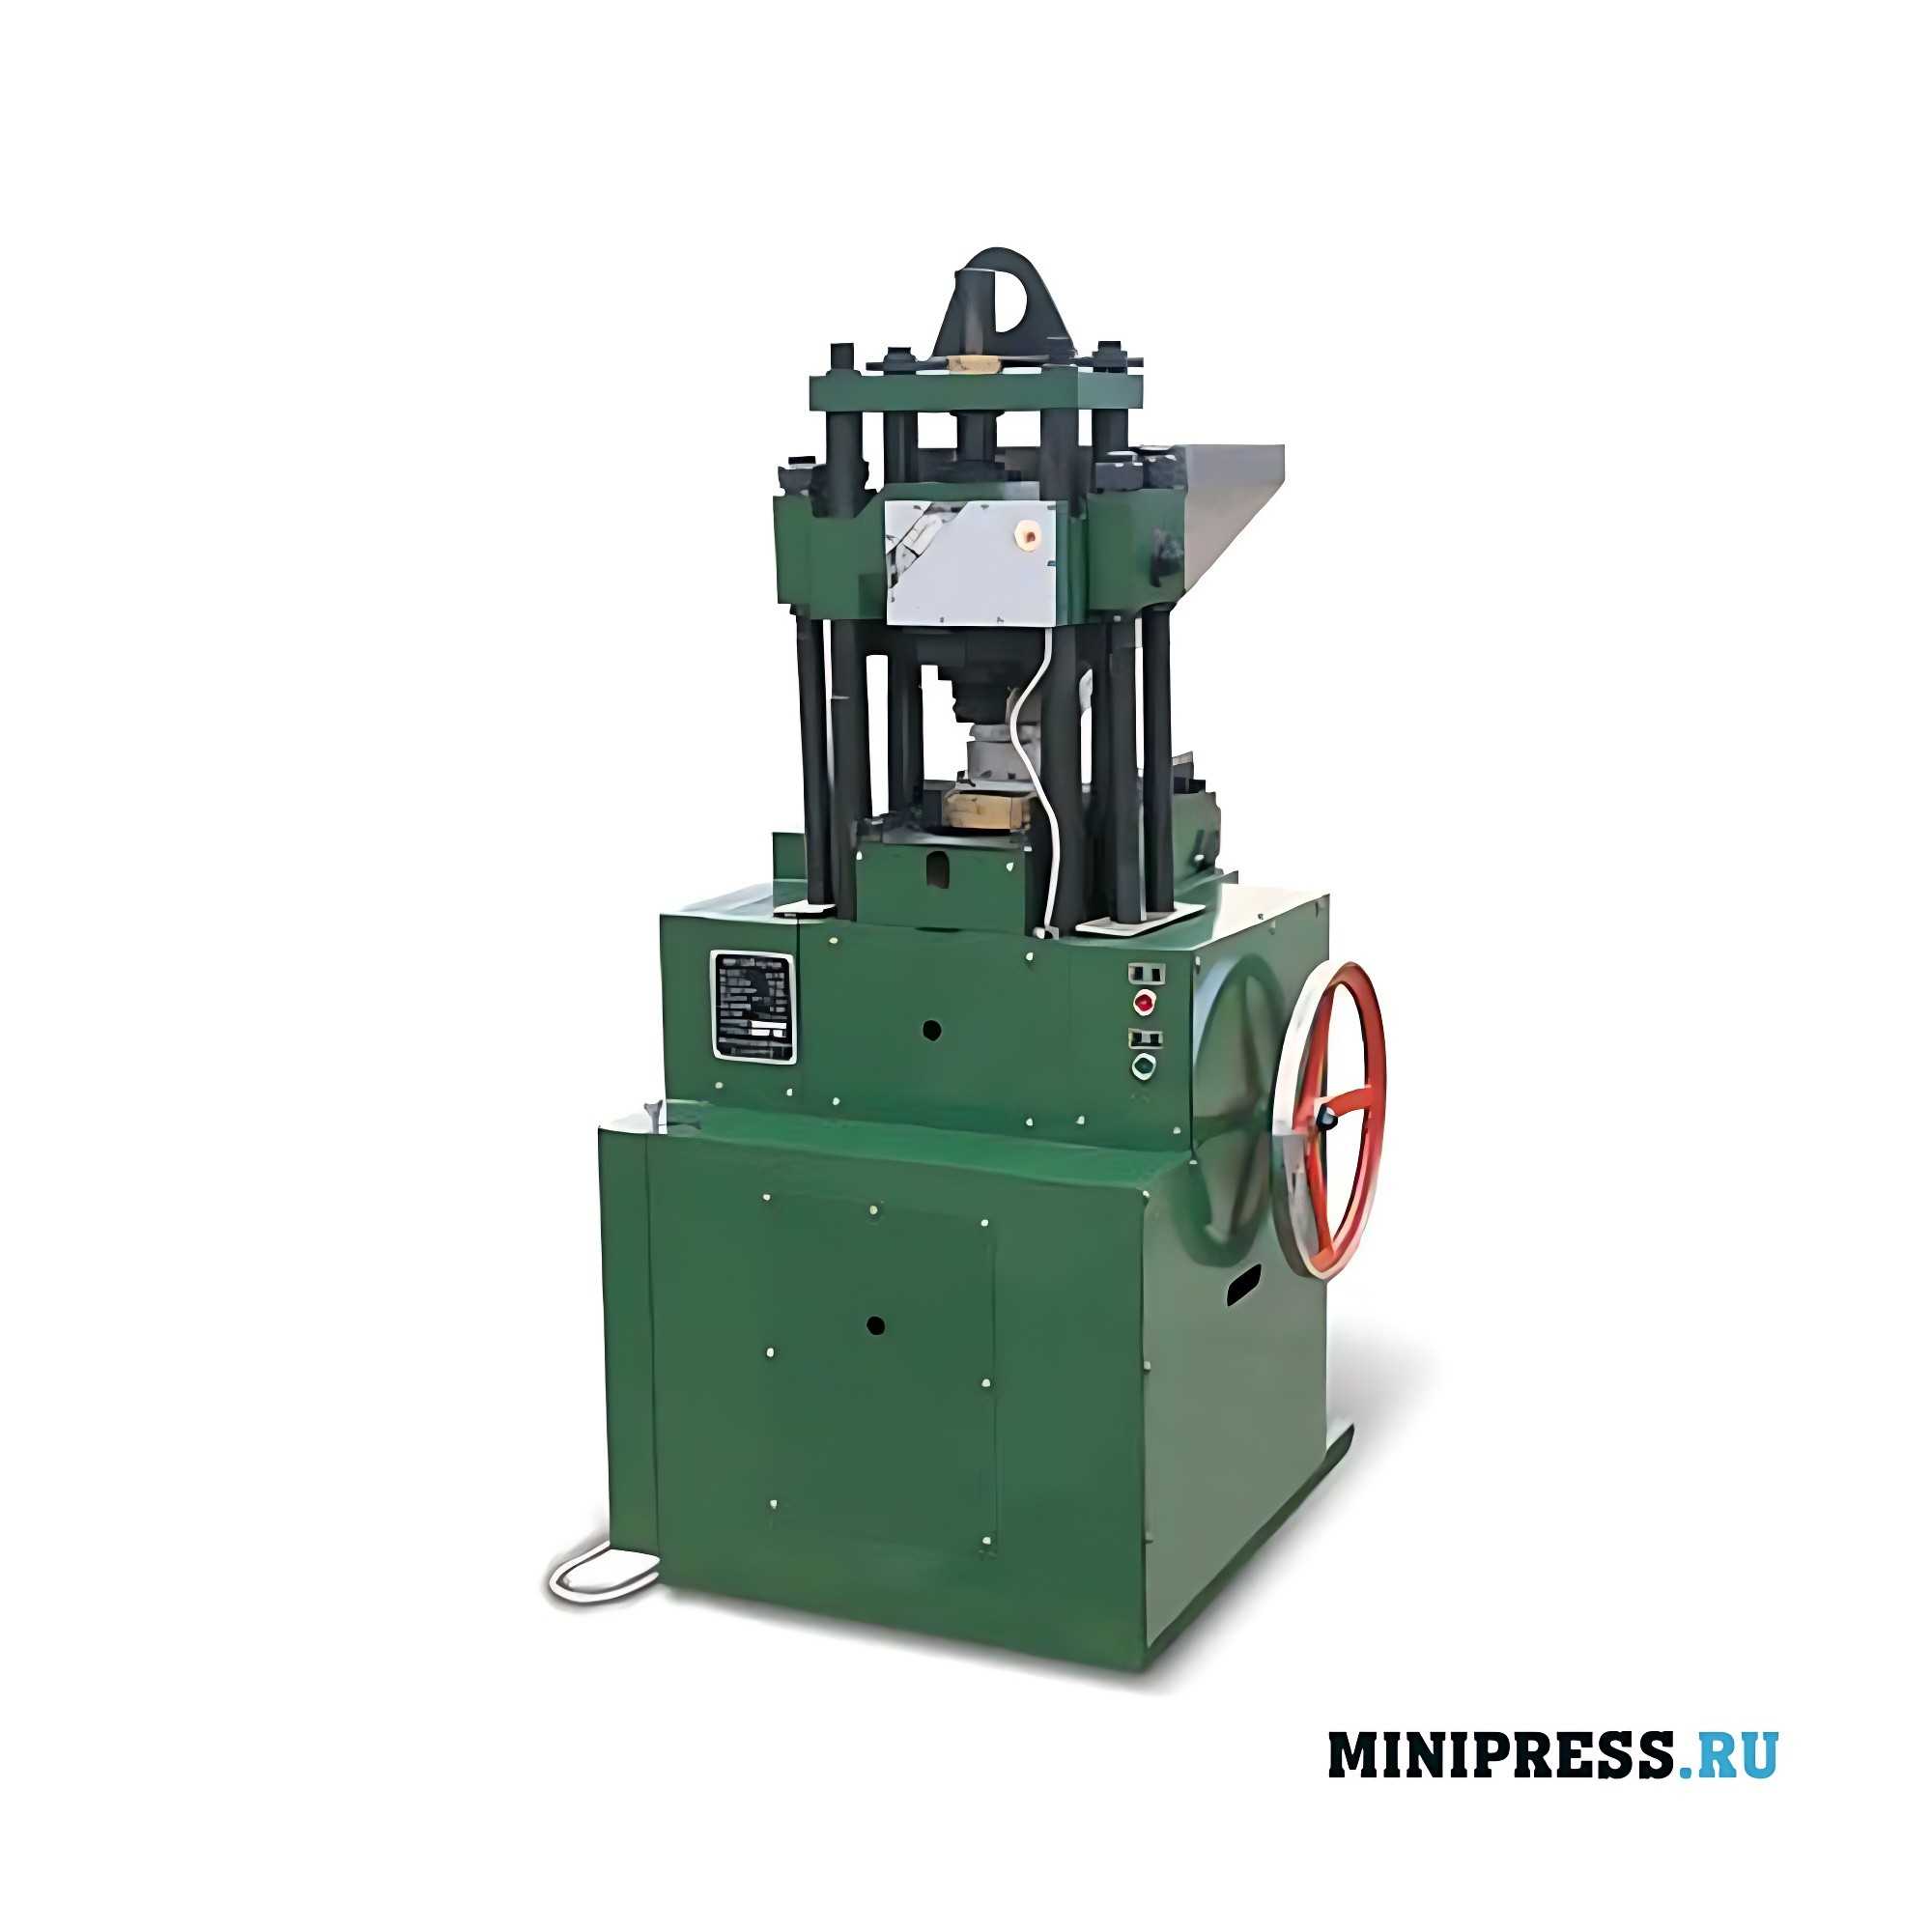 Single-punch tablet press LDY 1